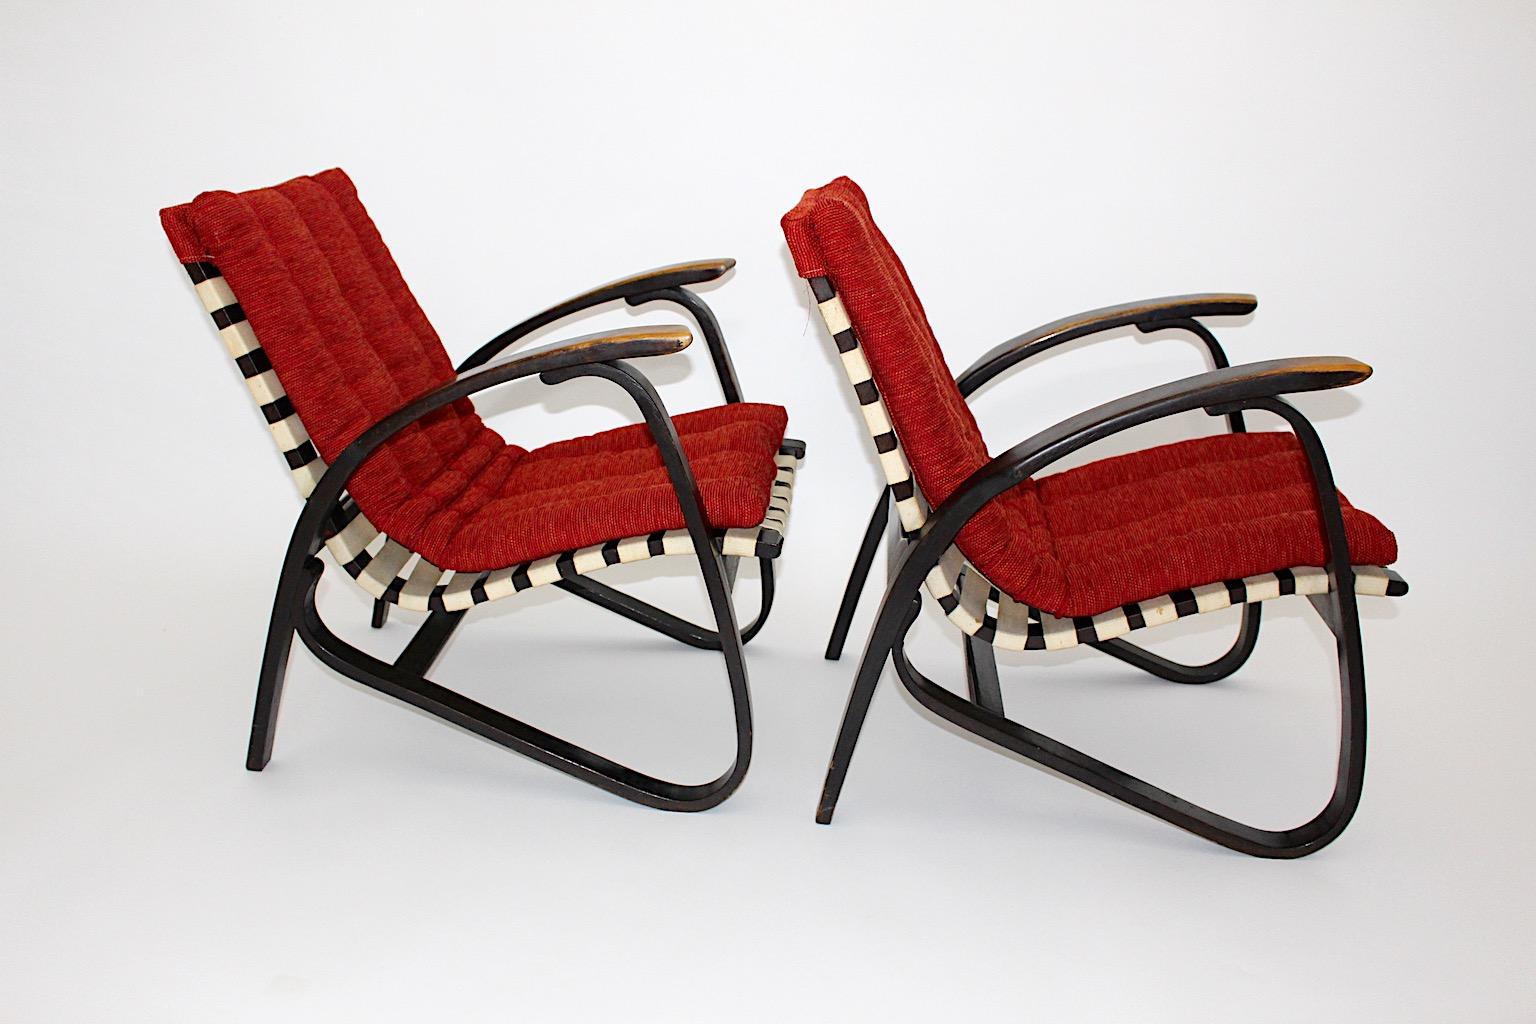 Art Deco vintage lounge chairs pair duo with red upholstery designed by Jan Vanek (1891 - 1962, Czech Rep.) and produced by UP Závody.
An amazing freestanding pair of lounge chairs from bentwood with structured textile loose cover in warm red color.